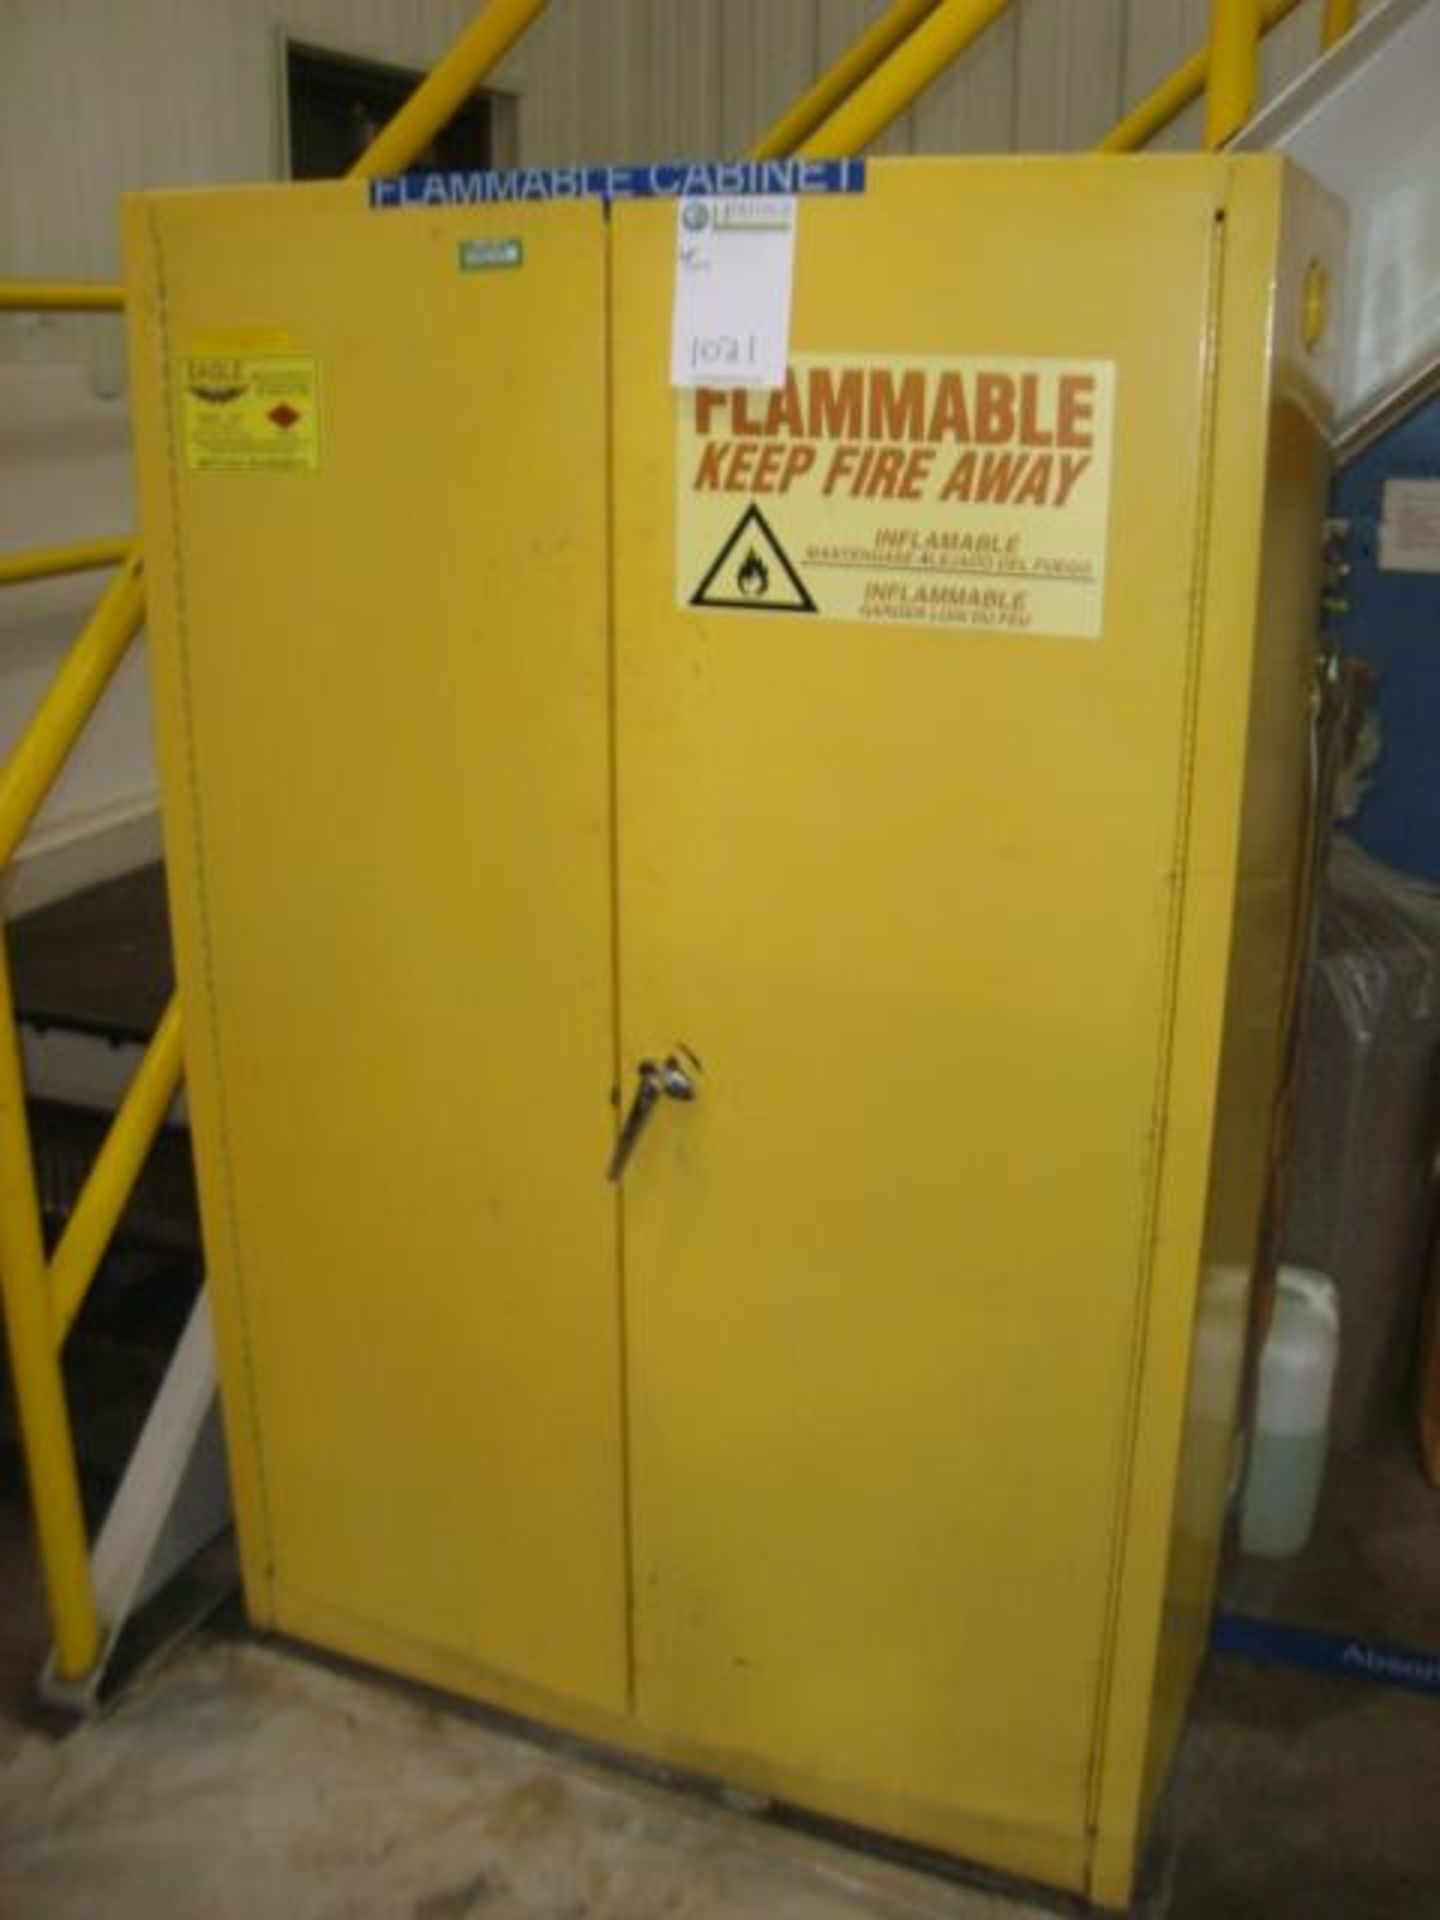 Flammable Contents Cabinets - Image 6 of 6